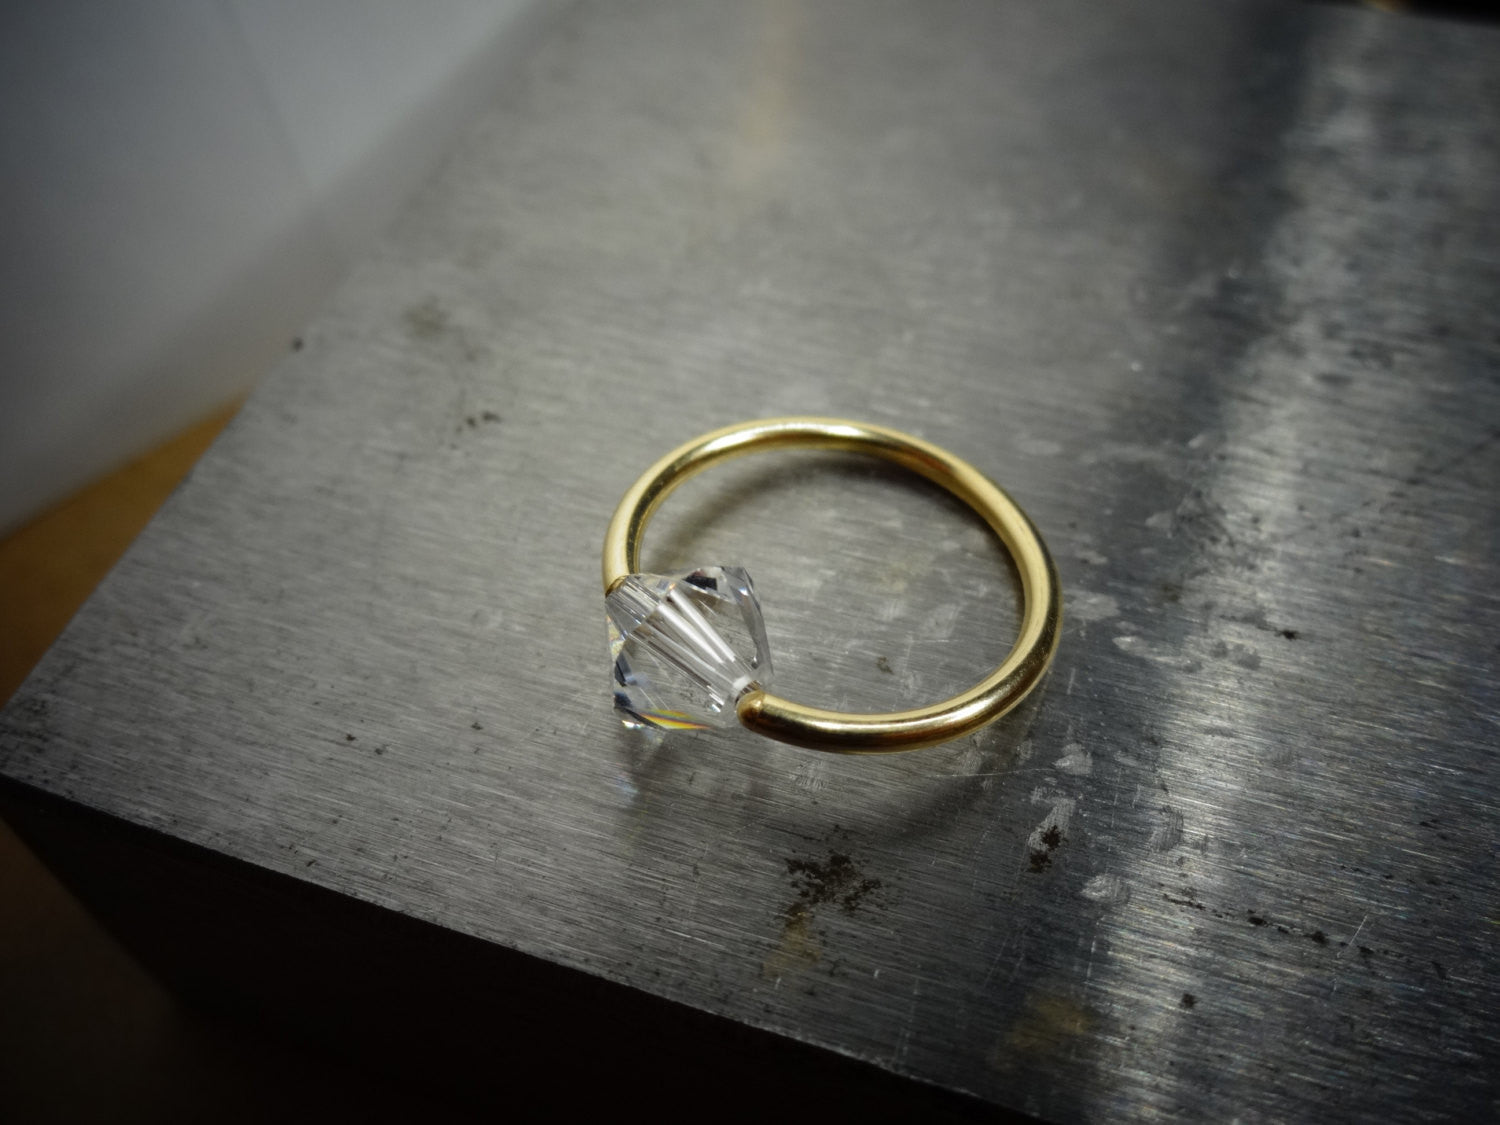 Captive Bead Ring made with 6mm CLEAR Swarovski Crystal - 14 ga Hoop - 14k Gold (Y, W, or R), Sterling Silver, or Platinum